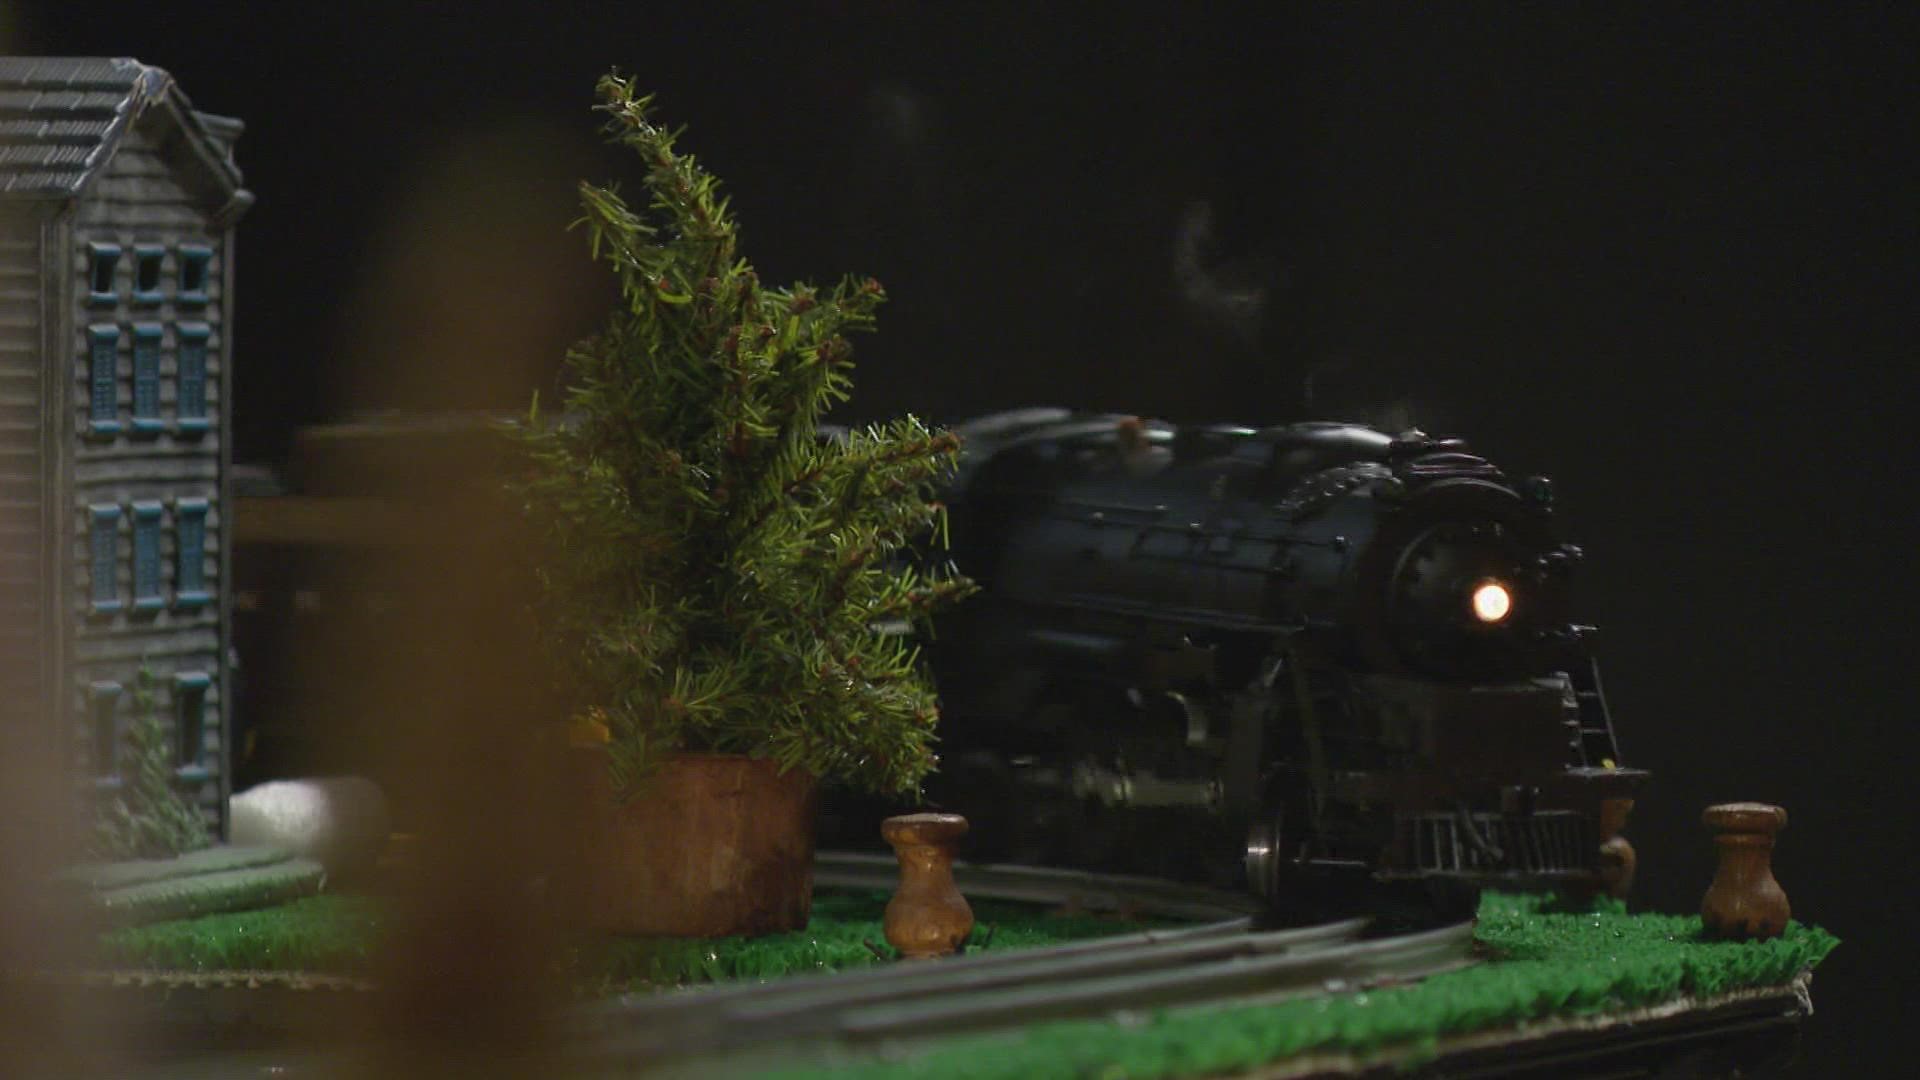 Bill Vander Vennen became interested in toy trains when he was a child. Today, at 79, he's meticulously created a breathtaking model train display in his basement.